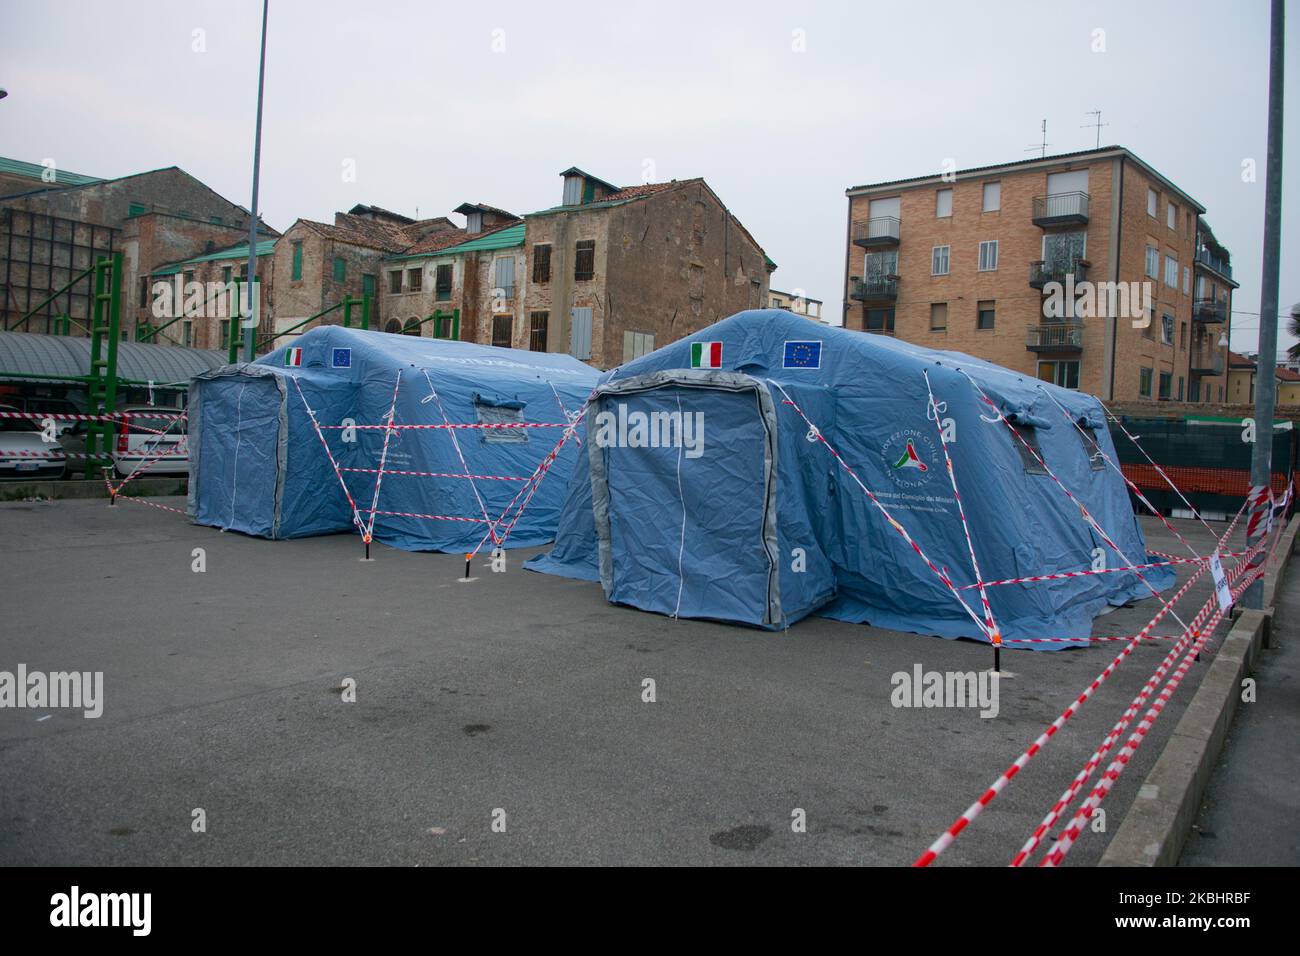 A view of tents near the Padua Hospital that will be used for patients hits by Coronavirus (Covid-19), in Padova, Italy, on February 24, 2020. The tents will be used for control swabs and checks on people who present themselves, with the aim of relieving, at least in part, the pressure on internal hospital structures, avoiding clogging up the emergency rooms and Infectious diseases for activities not directly related to their specificities. (Photo by Massimo Bertolini/NurPhoto) Stock Photo